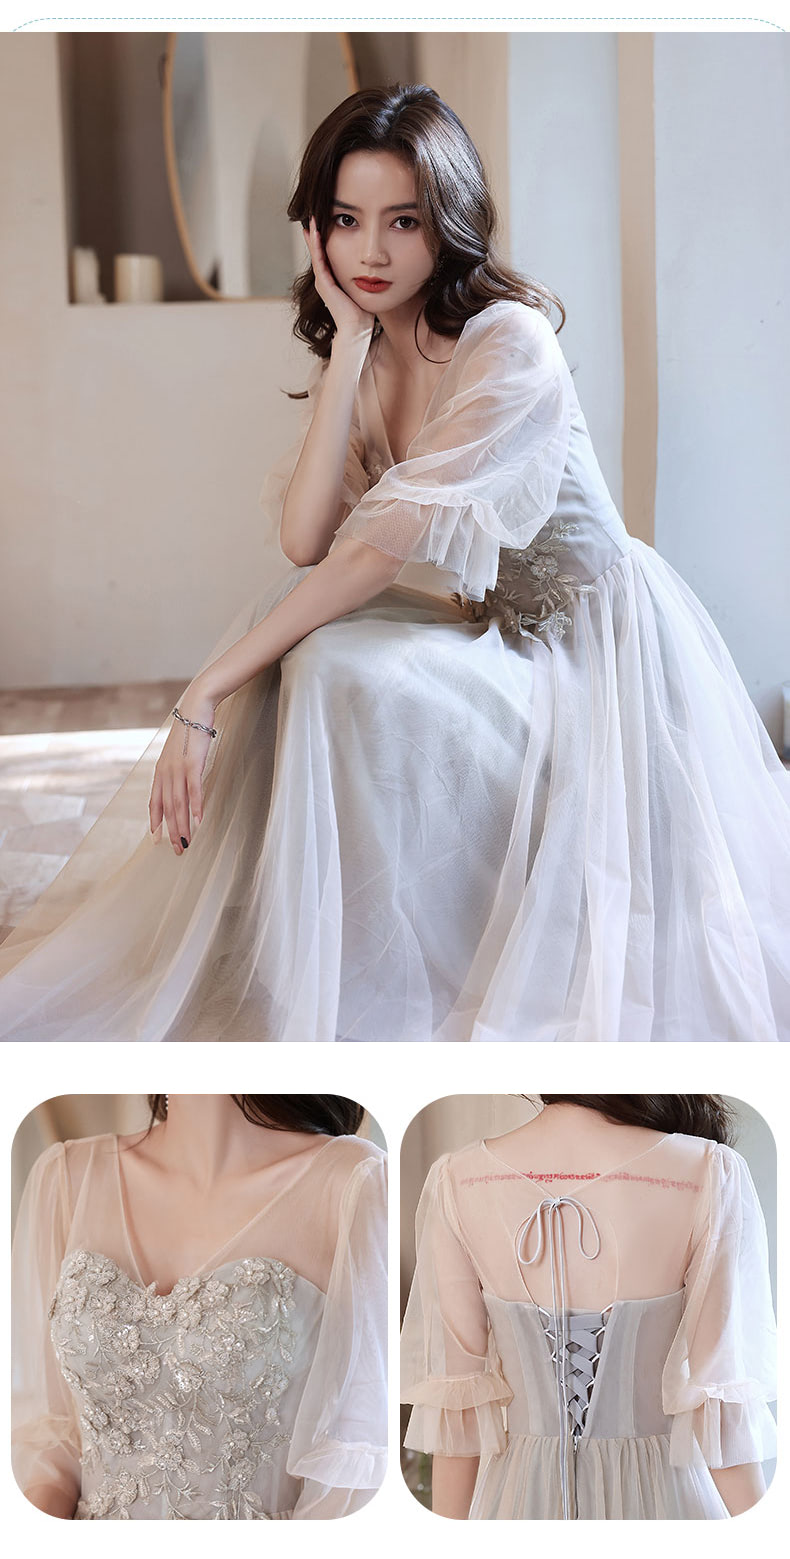 Multiway-Maxi-Bridesmaid-Dress-Wedding-Guest-Long-Formal-Outfit15.jpg